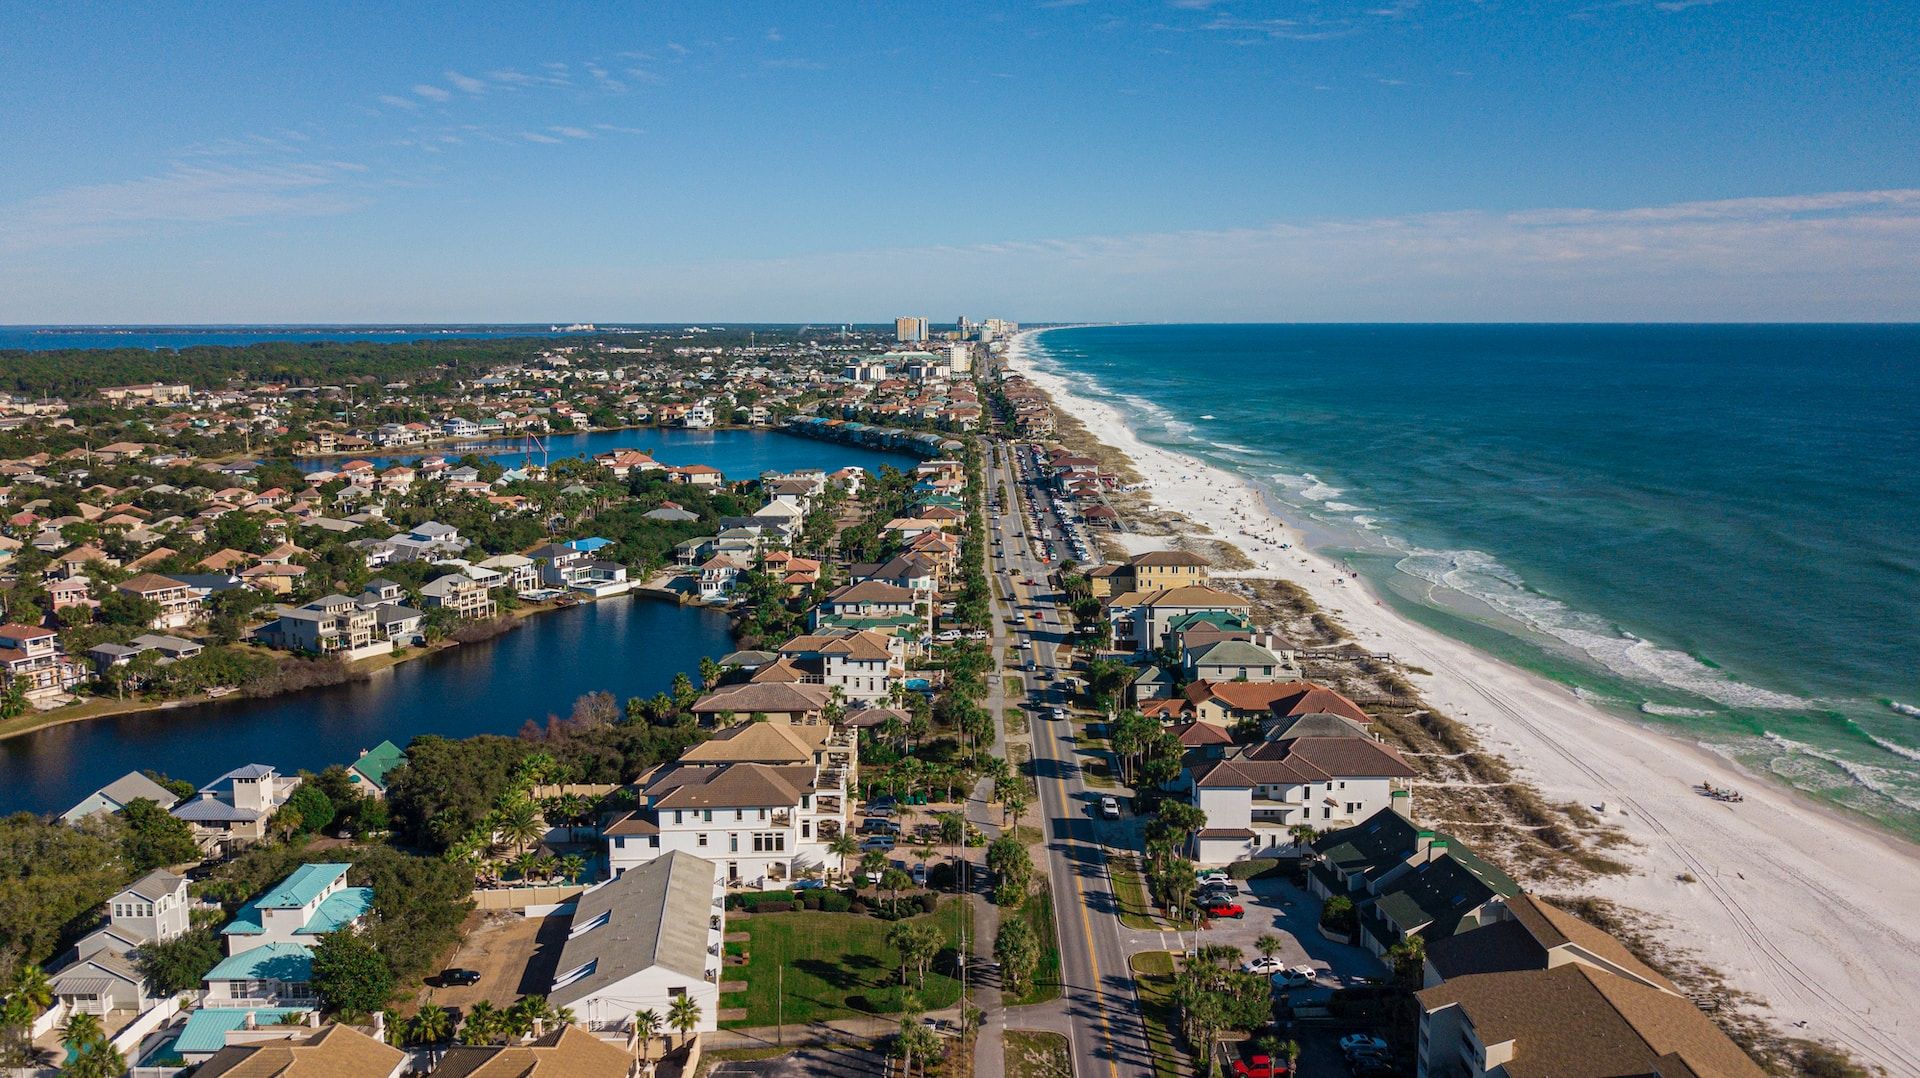 Drone shot of beach and houses in Destin FL